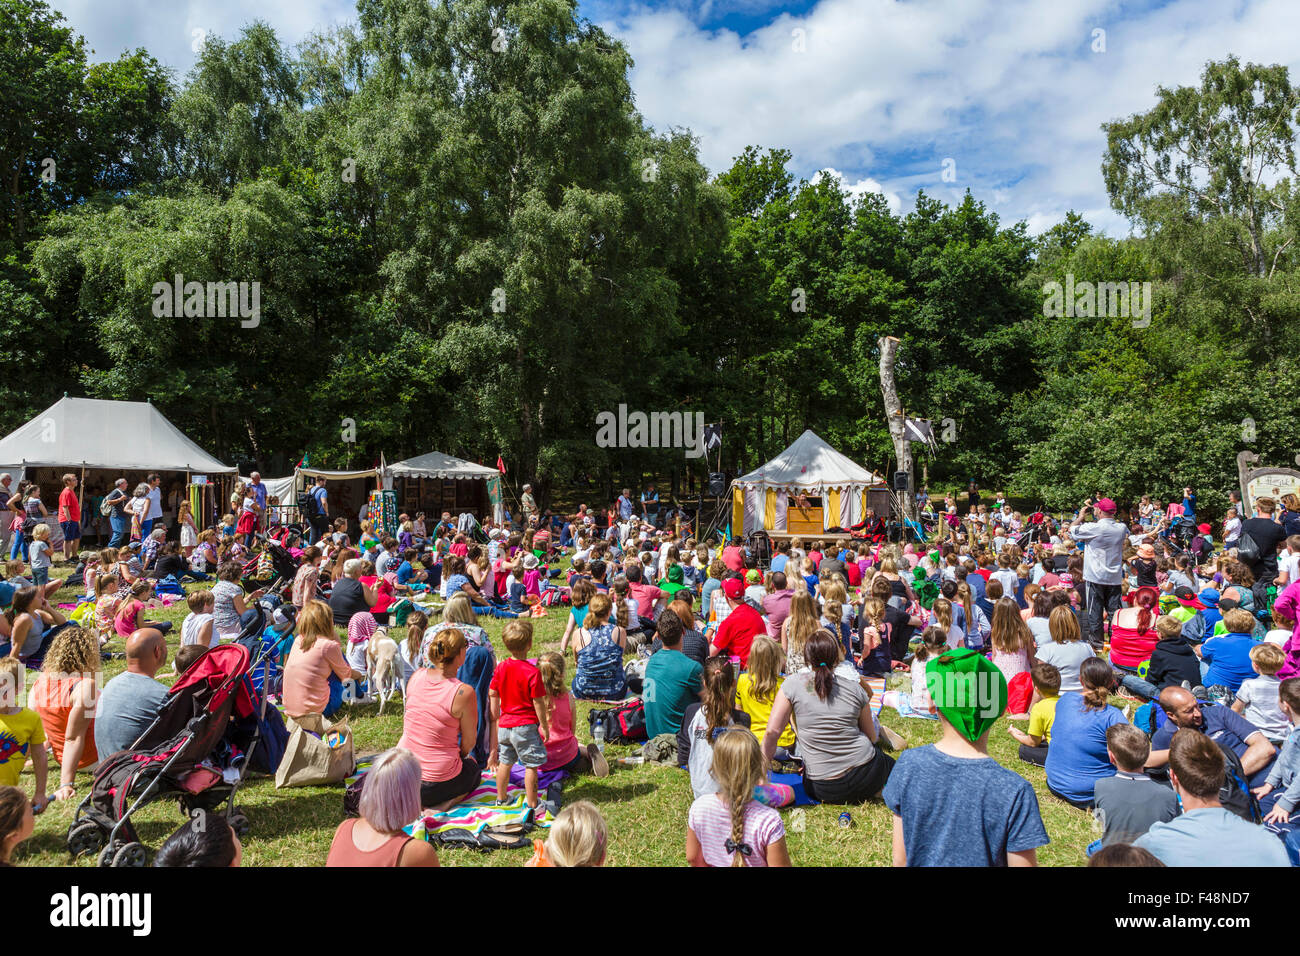 Family entertainment at the Robin Hood Festival in August 2015, Sherwood Forest Country Park, Edwinstowe, Nottinghamshire, UK Stock Photo